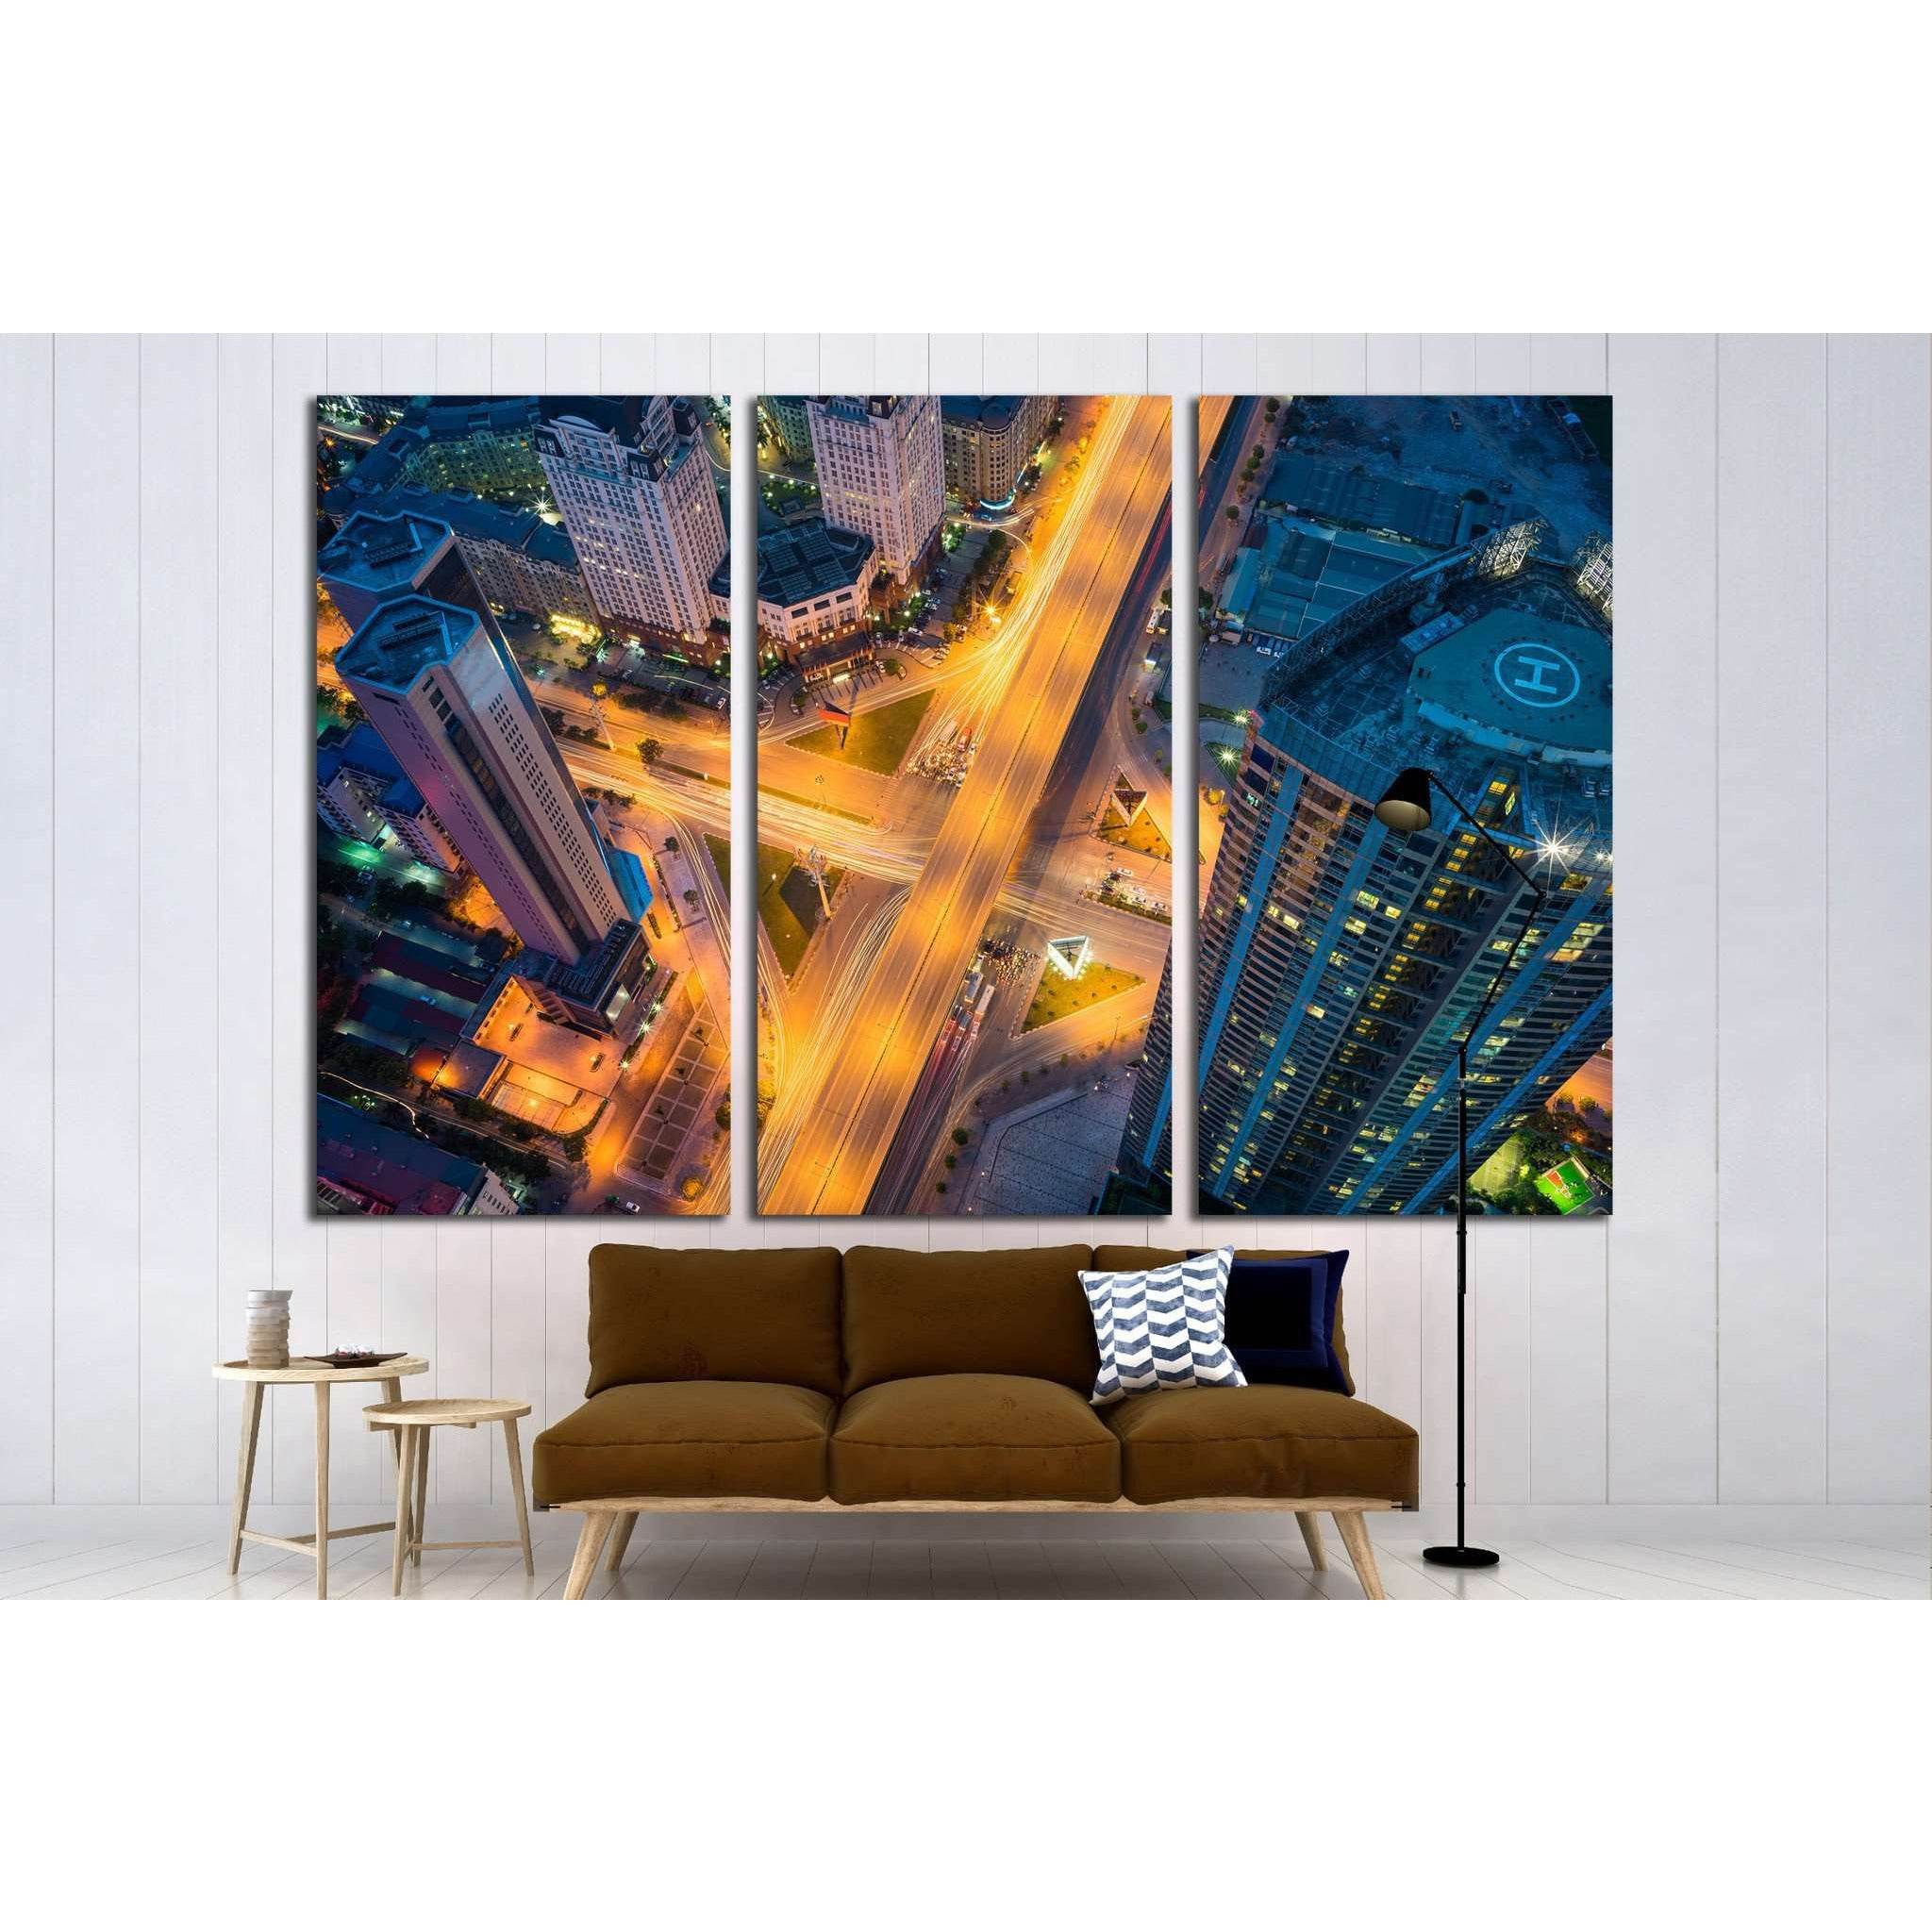 Hanoi cityscape, intersection Pham Hung - Duong Dinh Nghe, Vietnam №1555 Ready to Hang Canvas Print